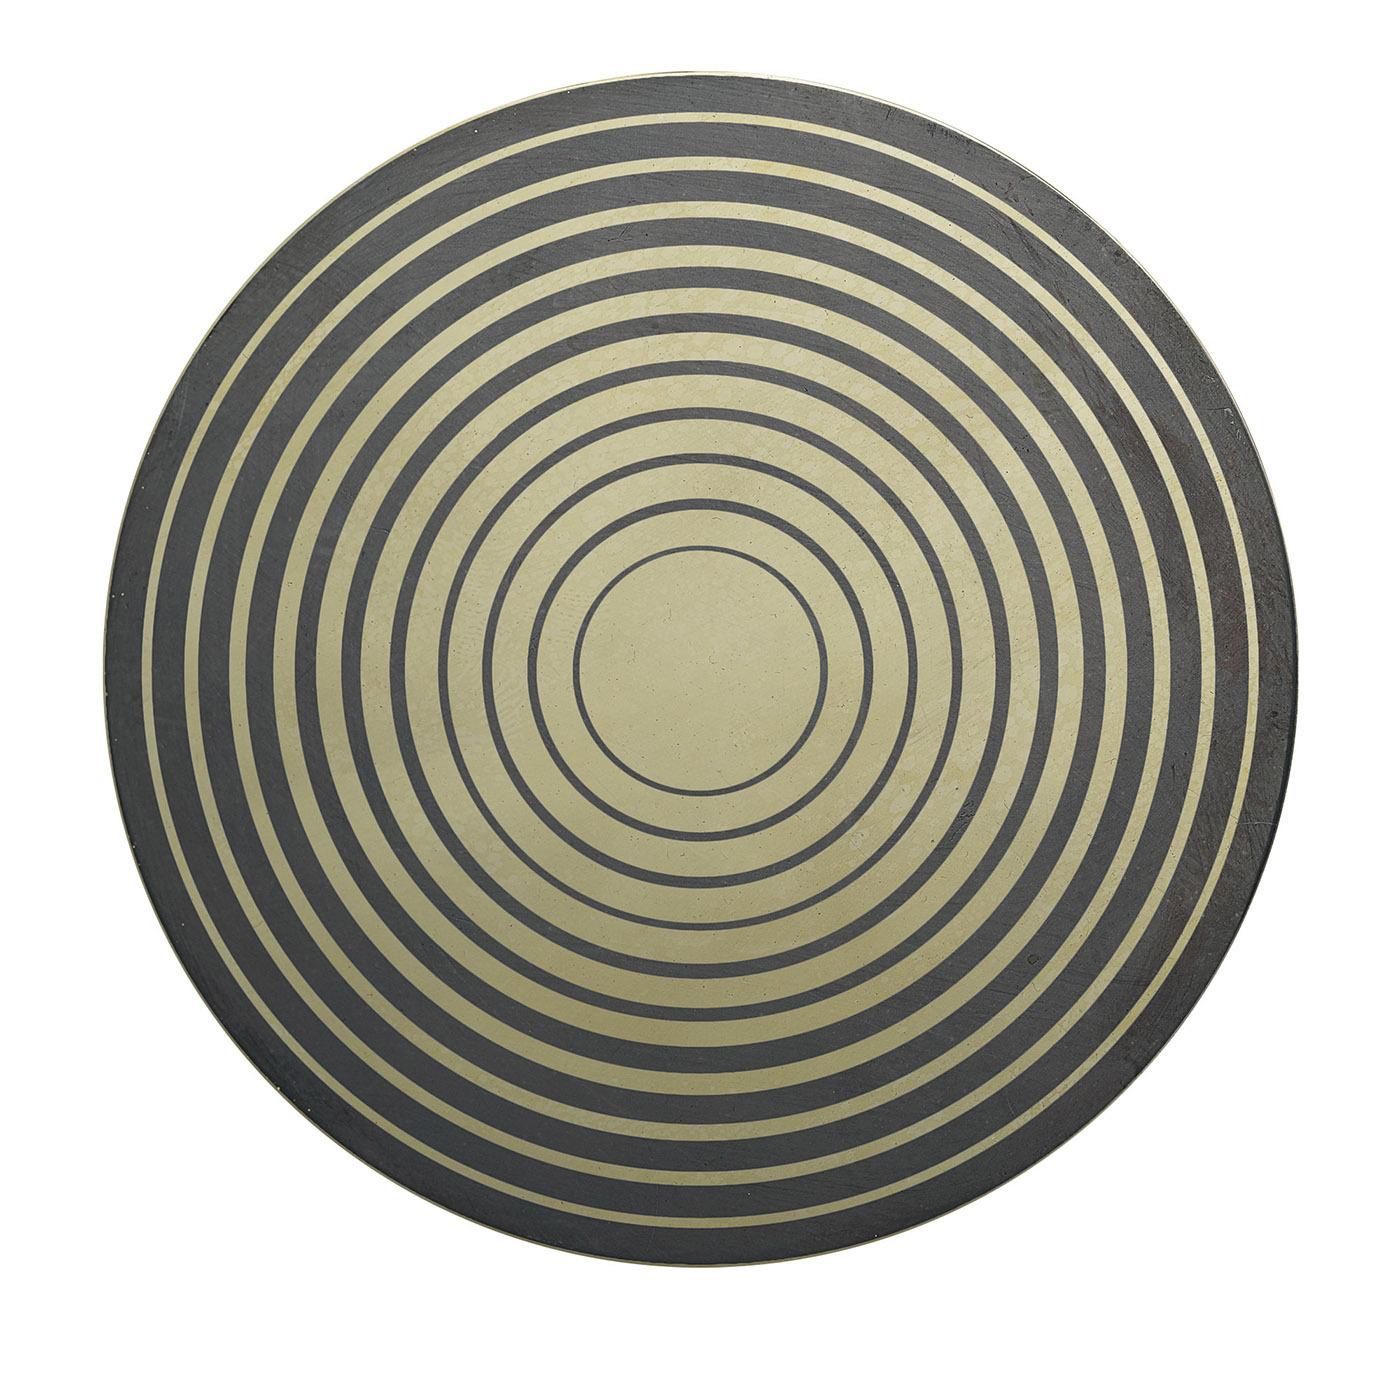 Oxides and enamels are cleverly combined to lend this brass decorative disk its distinguishing and unpredictable geometric design inspired by Aniconism. Evoking kinetic forces, it makes for a spot-on addition to contemporary decors, professional or